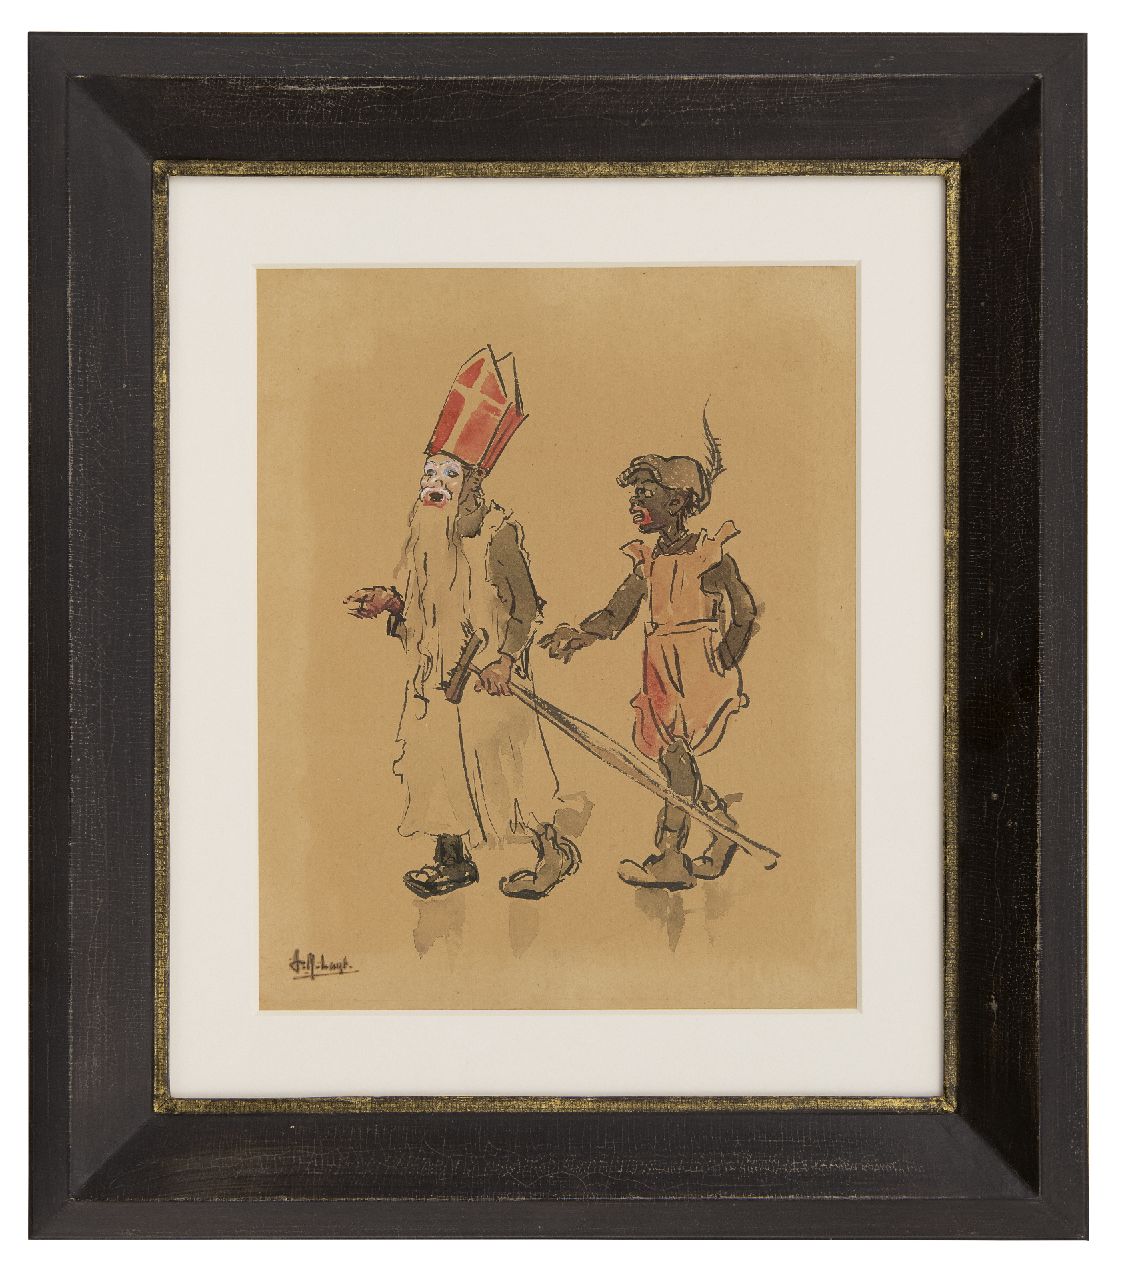 Luijt A.M.  | Arie Martinus 'Thies' Luijt | Watercolours and drawings offered for sale | Saint Nicholas and Peter, watercolour on paper 26.0 x 21.0 cm, signed l.l.